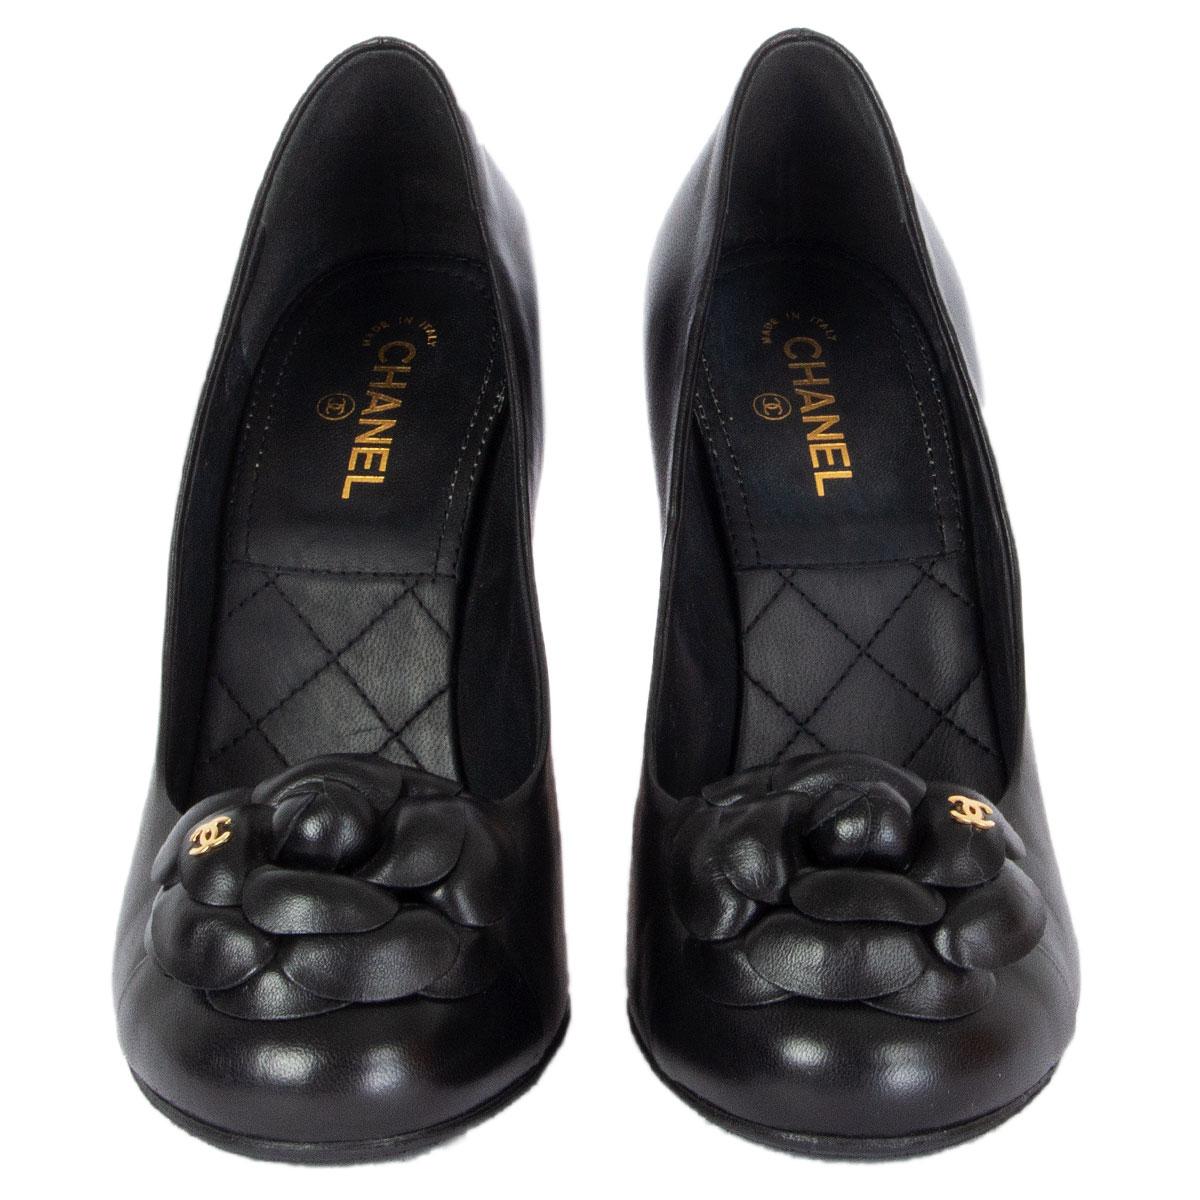 100% authentic Chanel CC Camelia pumps in black smooth leather featuring gold-tone CC logo on the flower. Brand new. Come with dust bag. Rubber sole has been added. 

Imprinted Size	38.5
Shoe Size	38.5
Inside Sole	25cm (9.8in)
Width	7.5cm